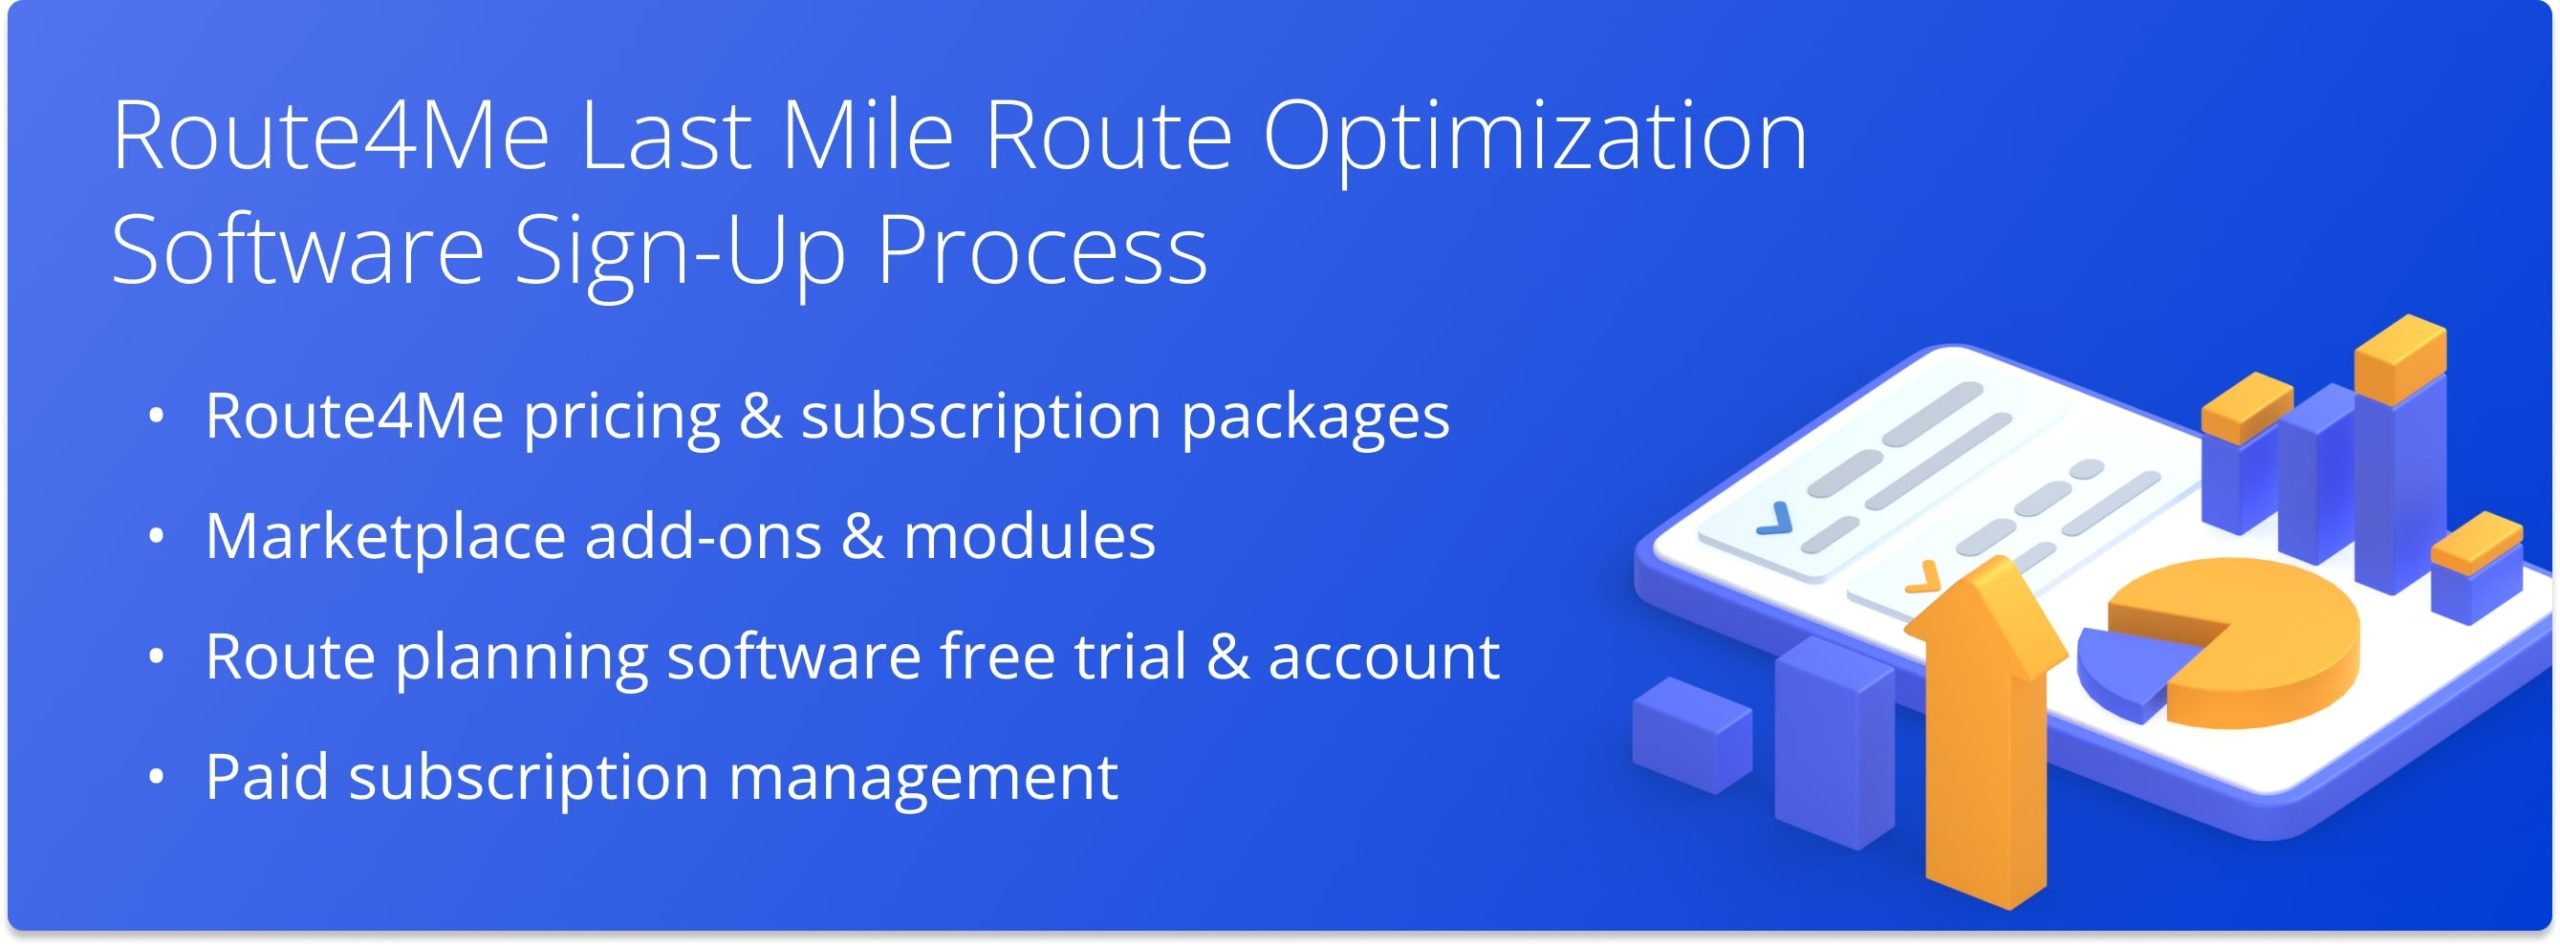 Route4Me Subscription packages, pricing, account registration, free trial, and subscription management.